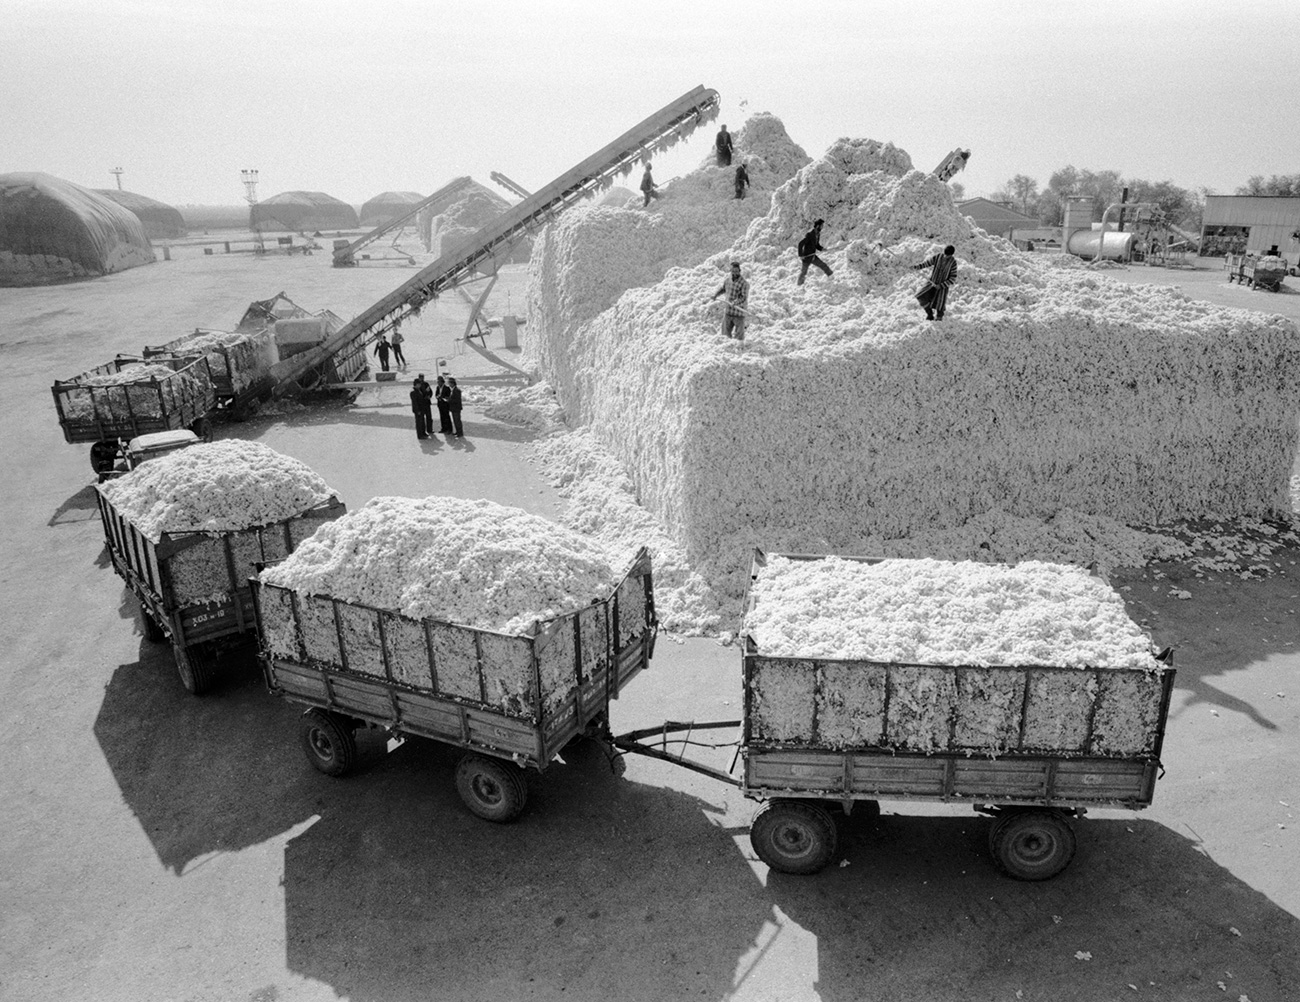 To make up for the shortfall, cottonpickers started putting stones in their sacks, and empty rail carriages were dispatched to Moscow where dishonest officials would take bribes to record them as being full. // Kazakh SSR